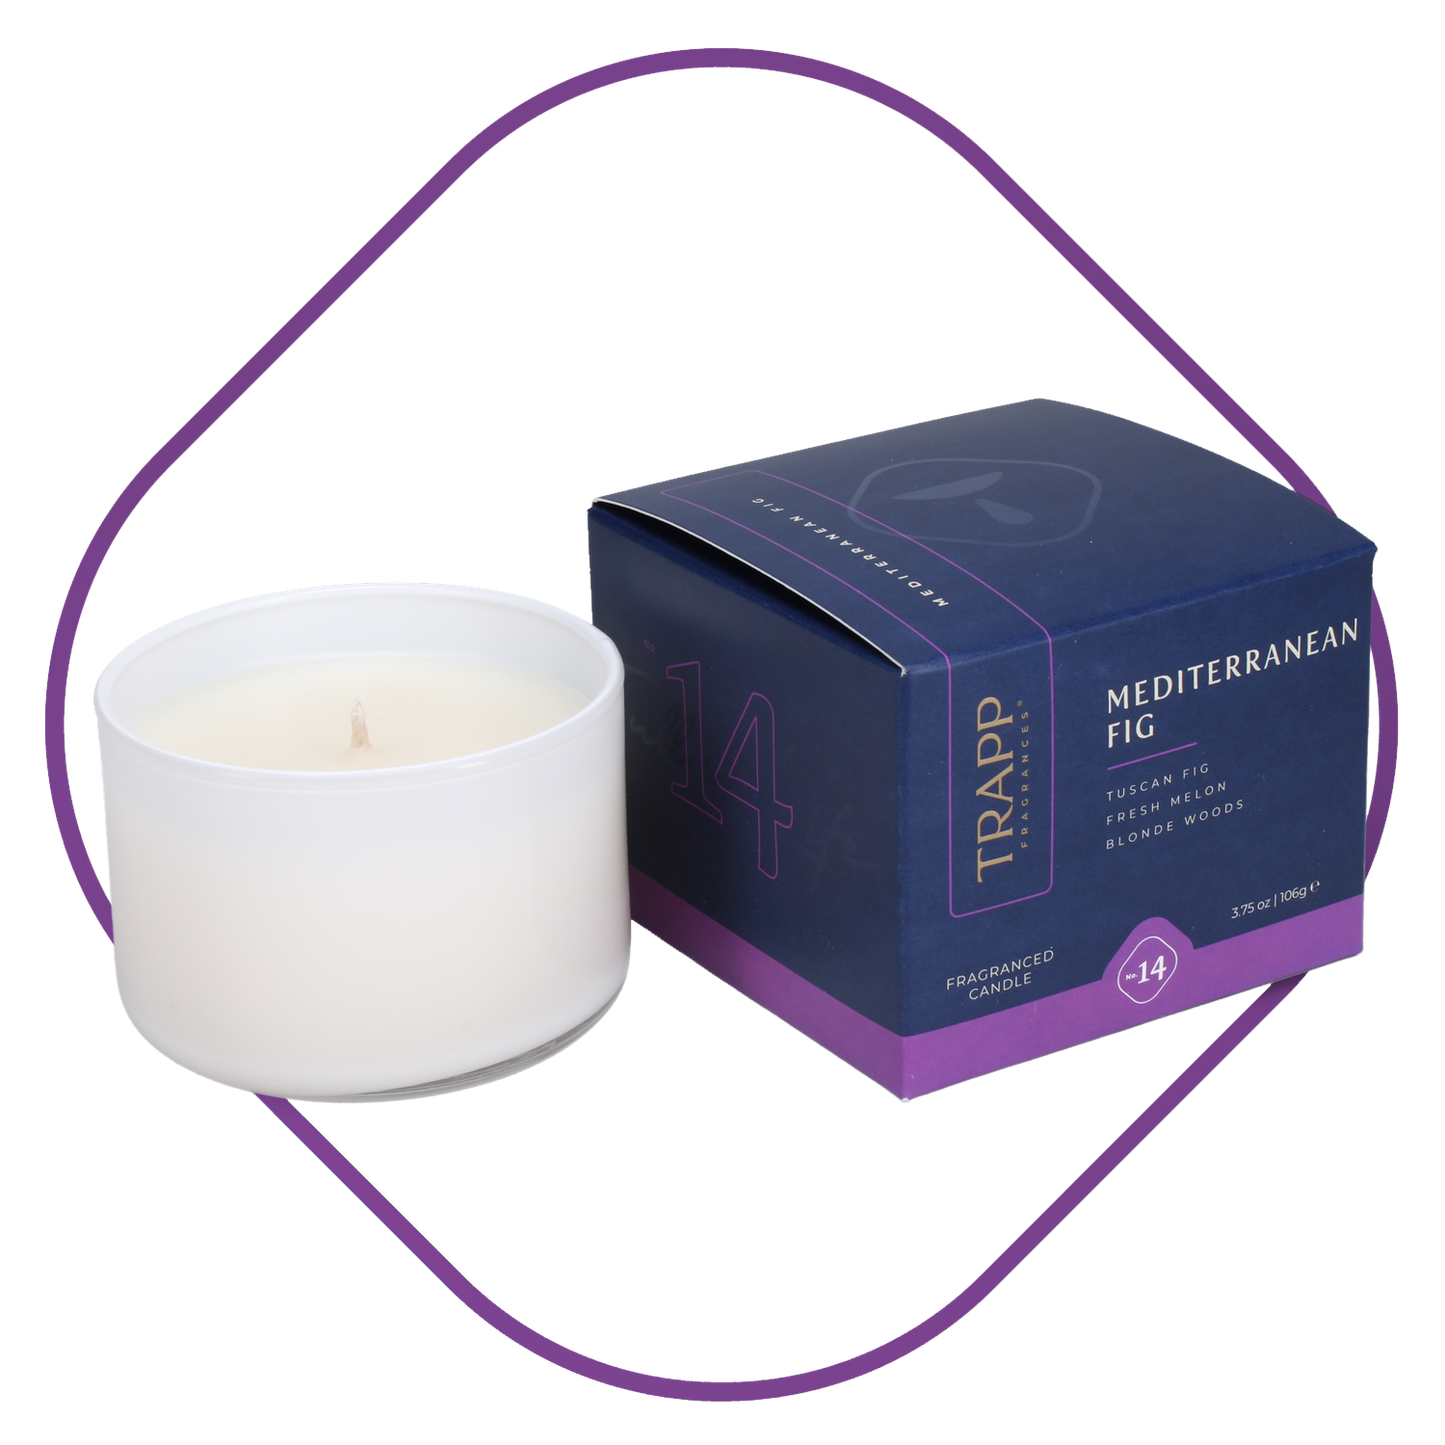 No. 14 Mediterranean Fig 3.75 oz. Small Poured Candle